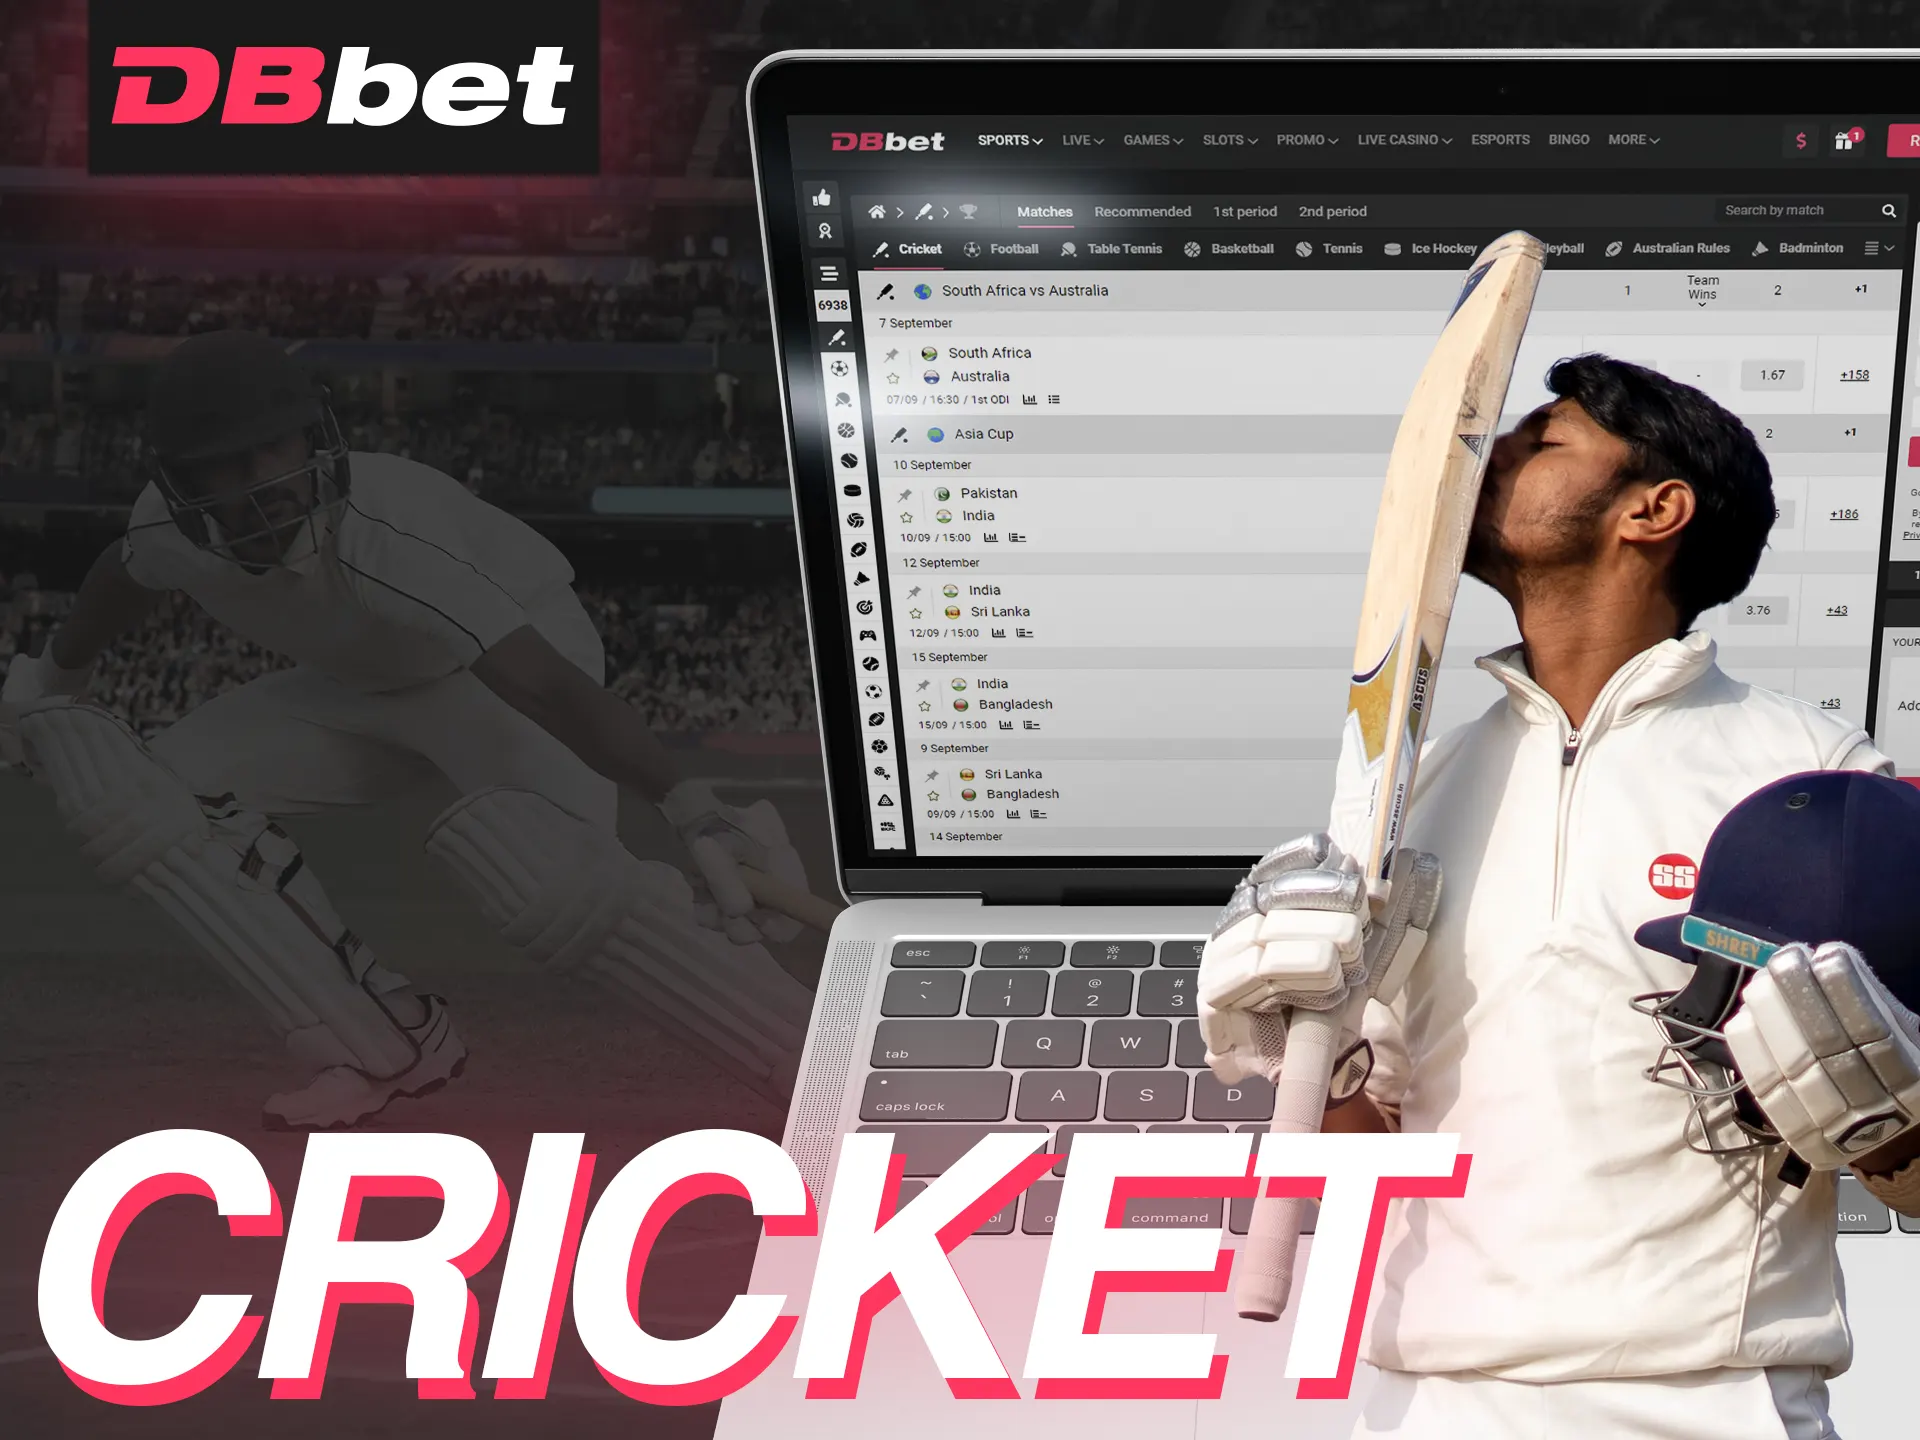 Bet on cricket with DB Bet.